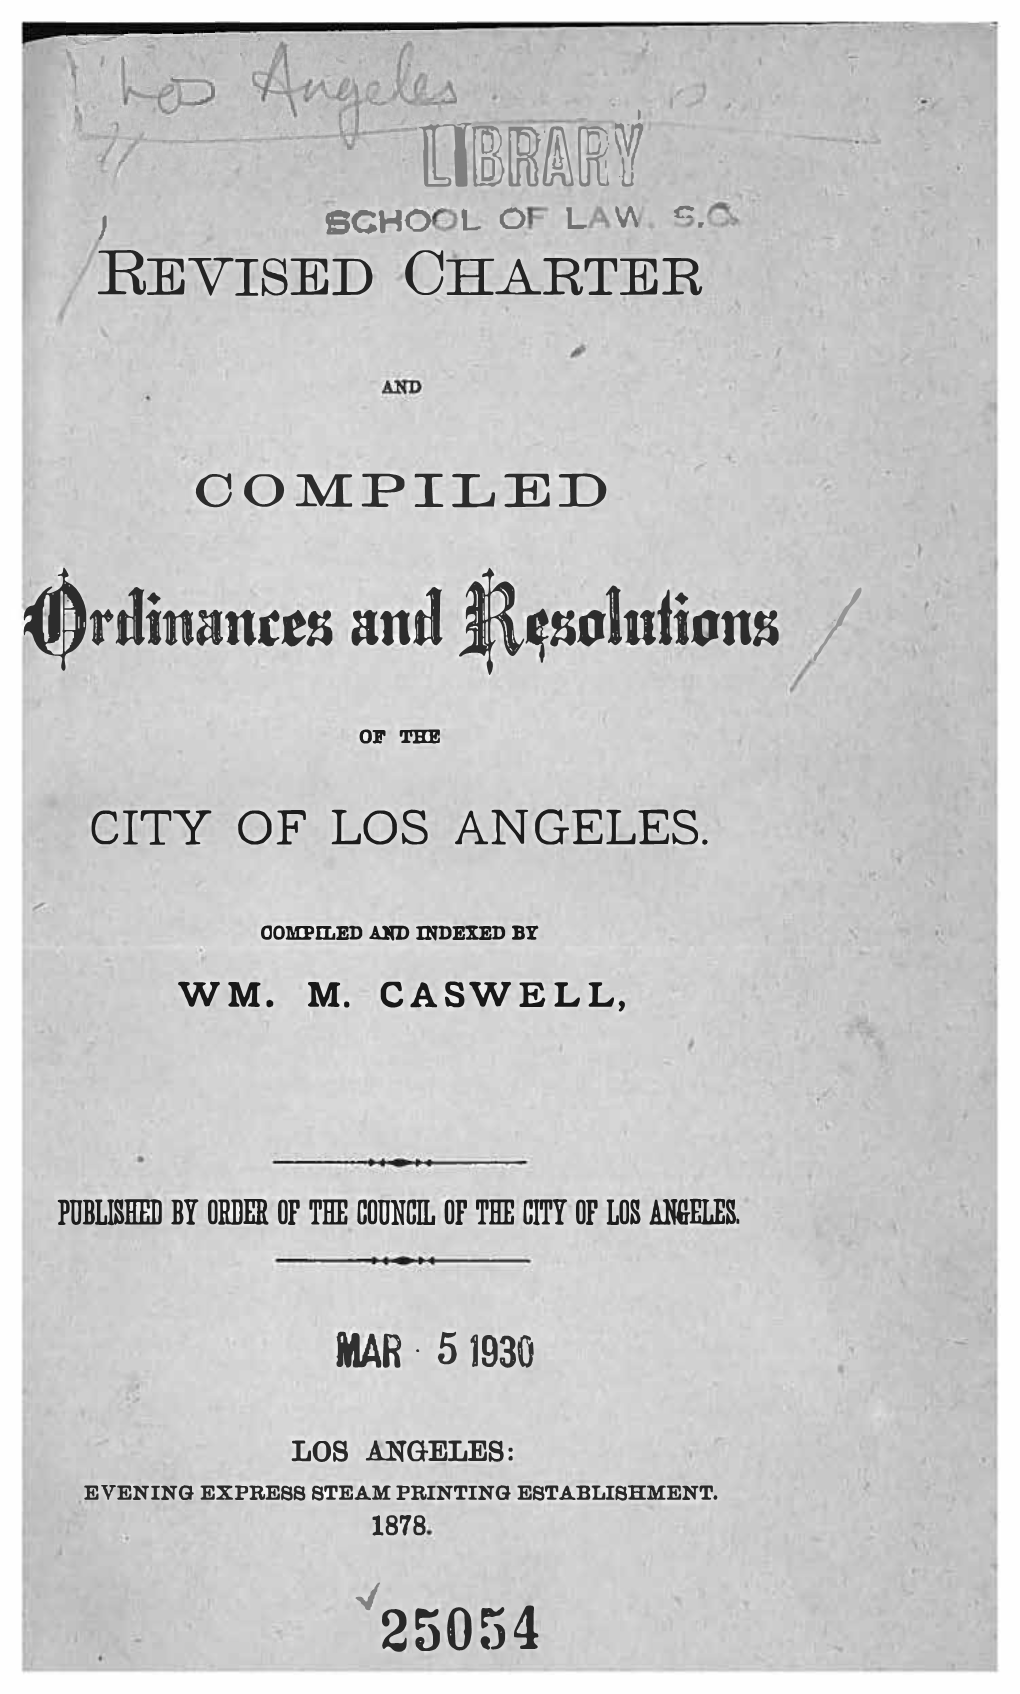 Contract Between City of Los Angeles and J.S. Griffin, P. Beaudry, And